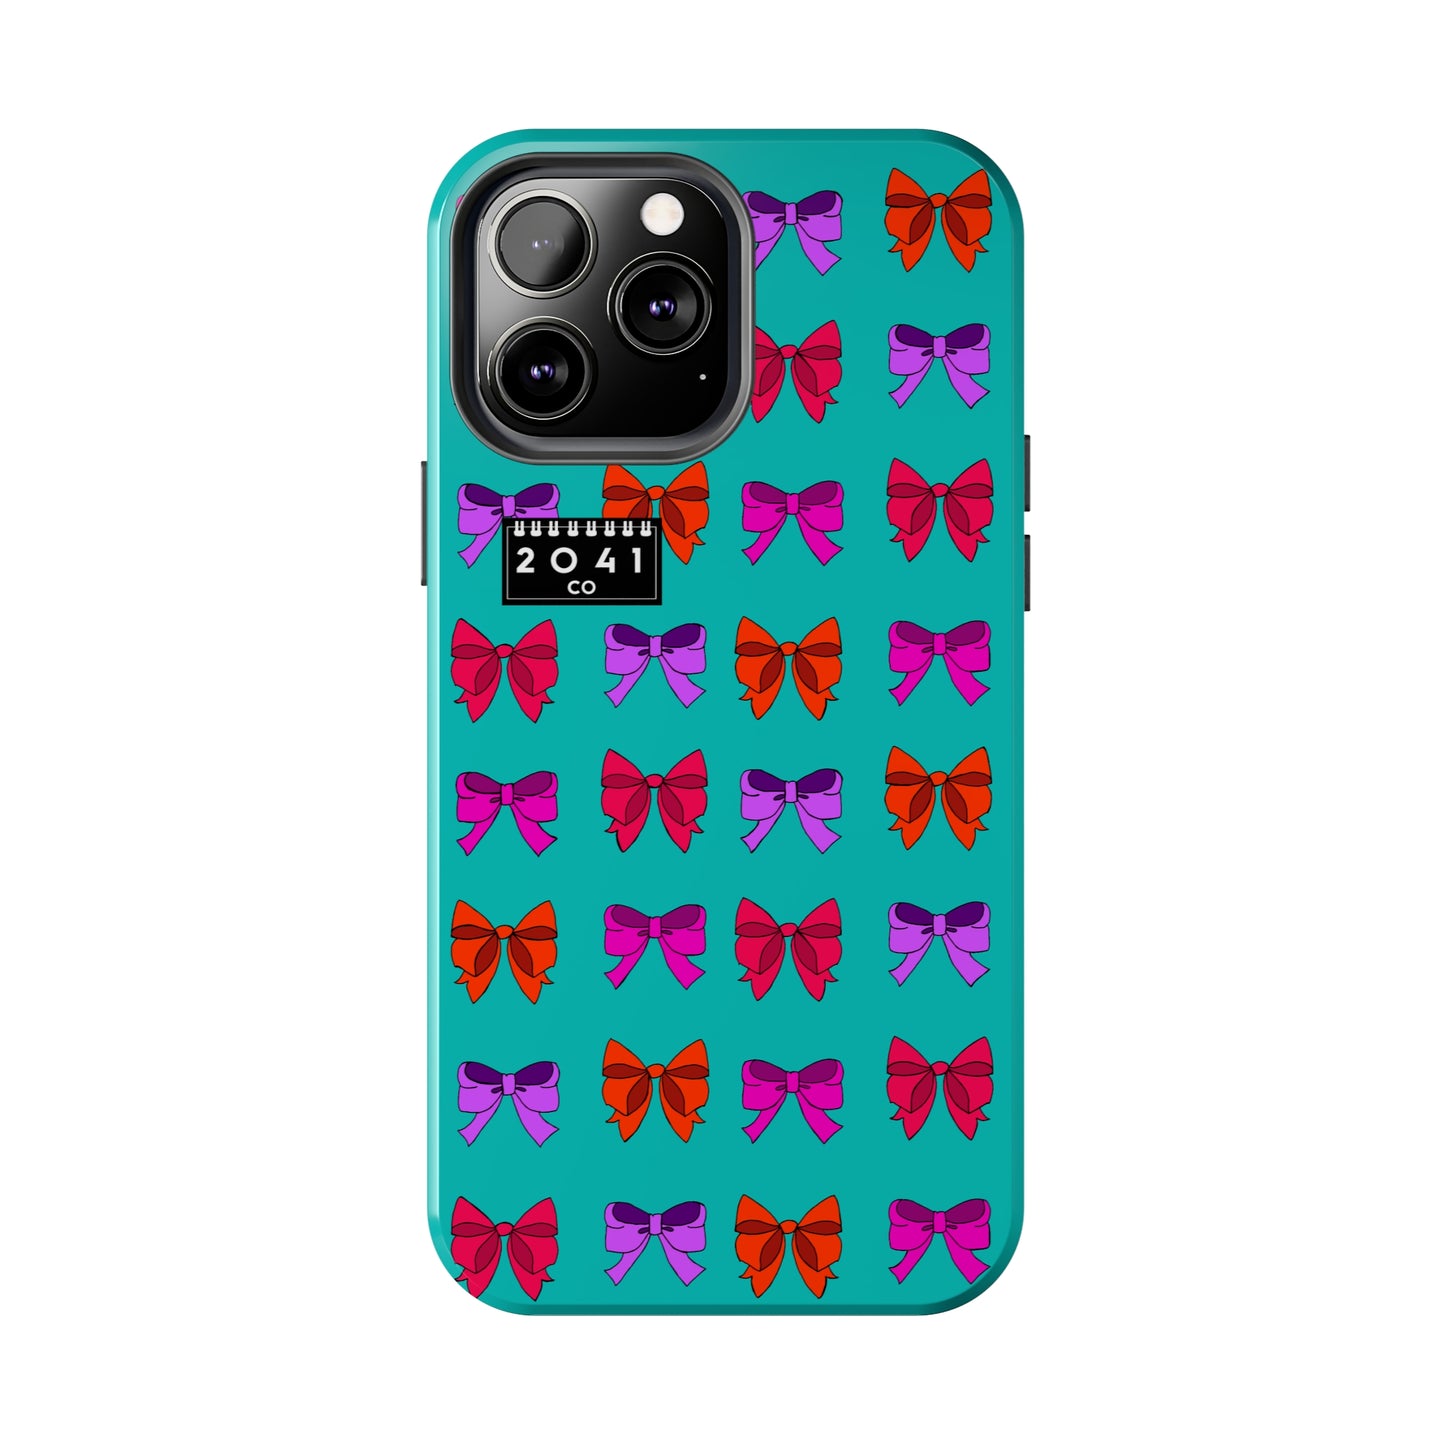 2041 CO IPHONE CASE | BOWS